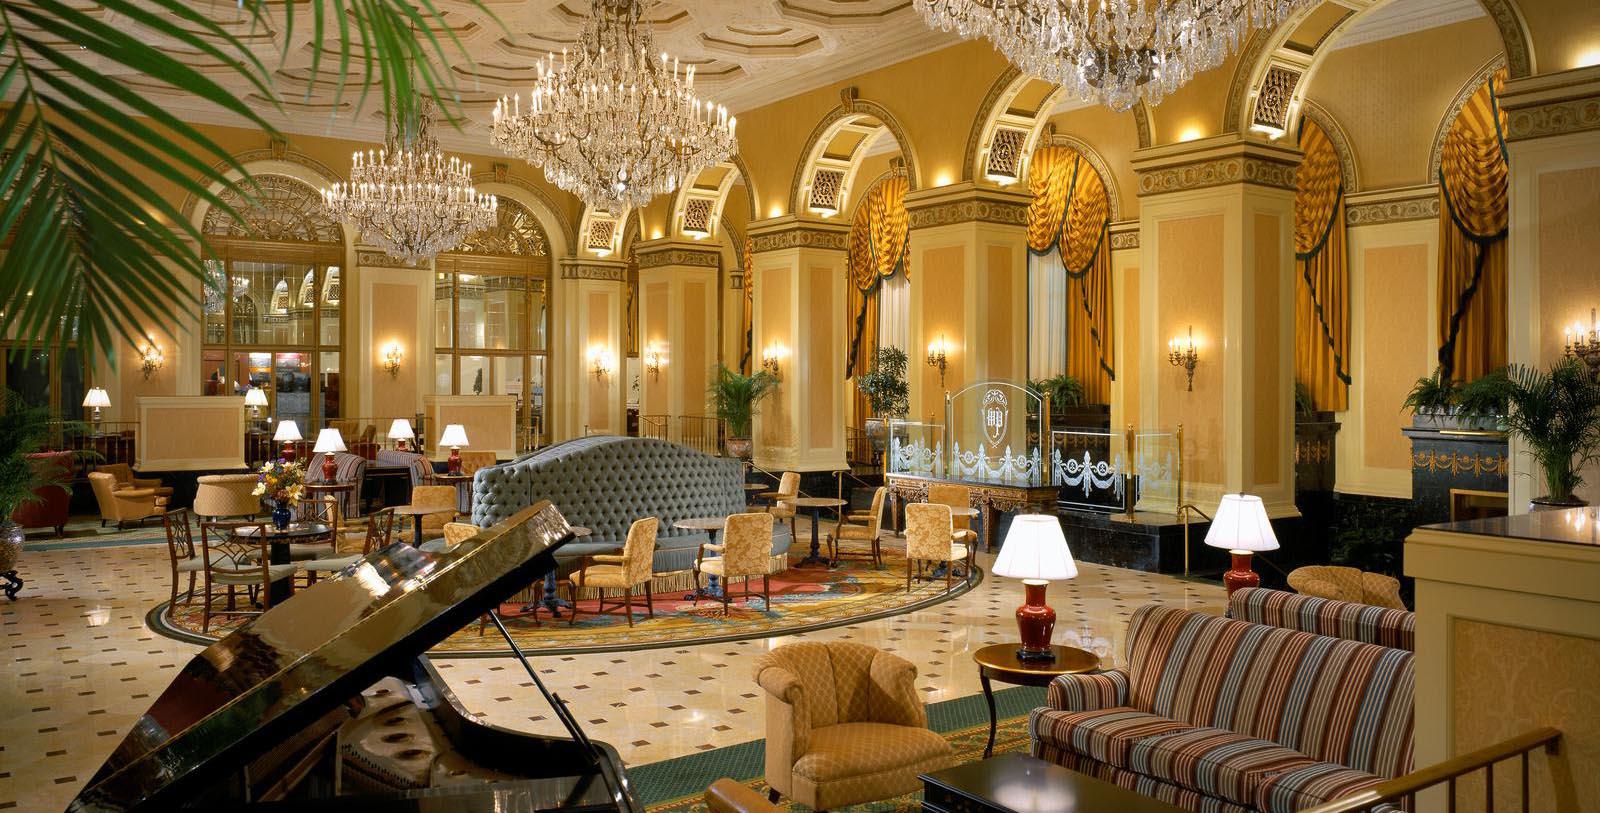 Interior lobby with chandeliers and piano of the Omni William Penn Hotel, Pittsburgh, Pennsylvania.